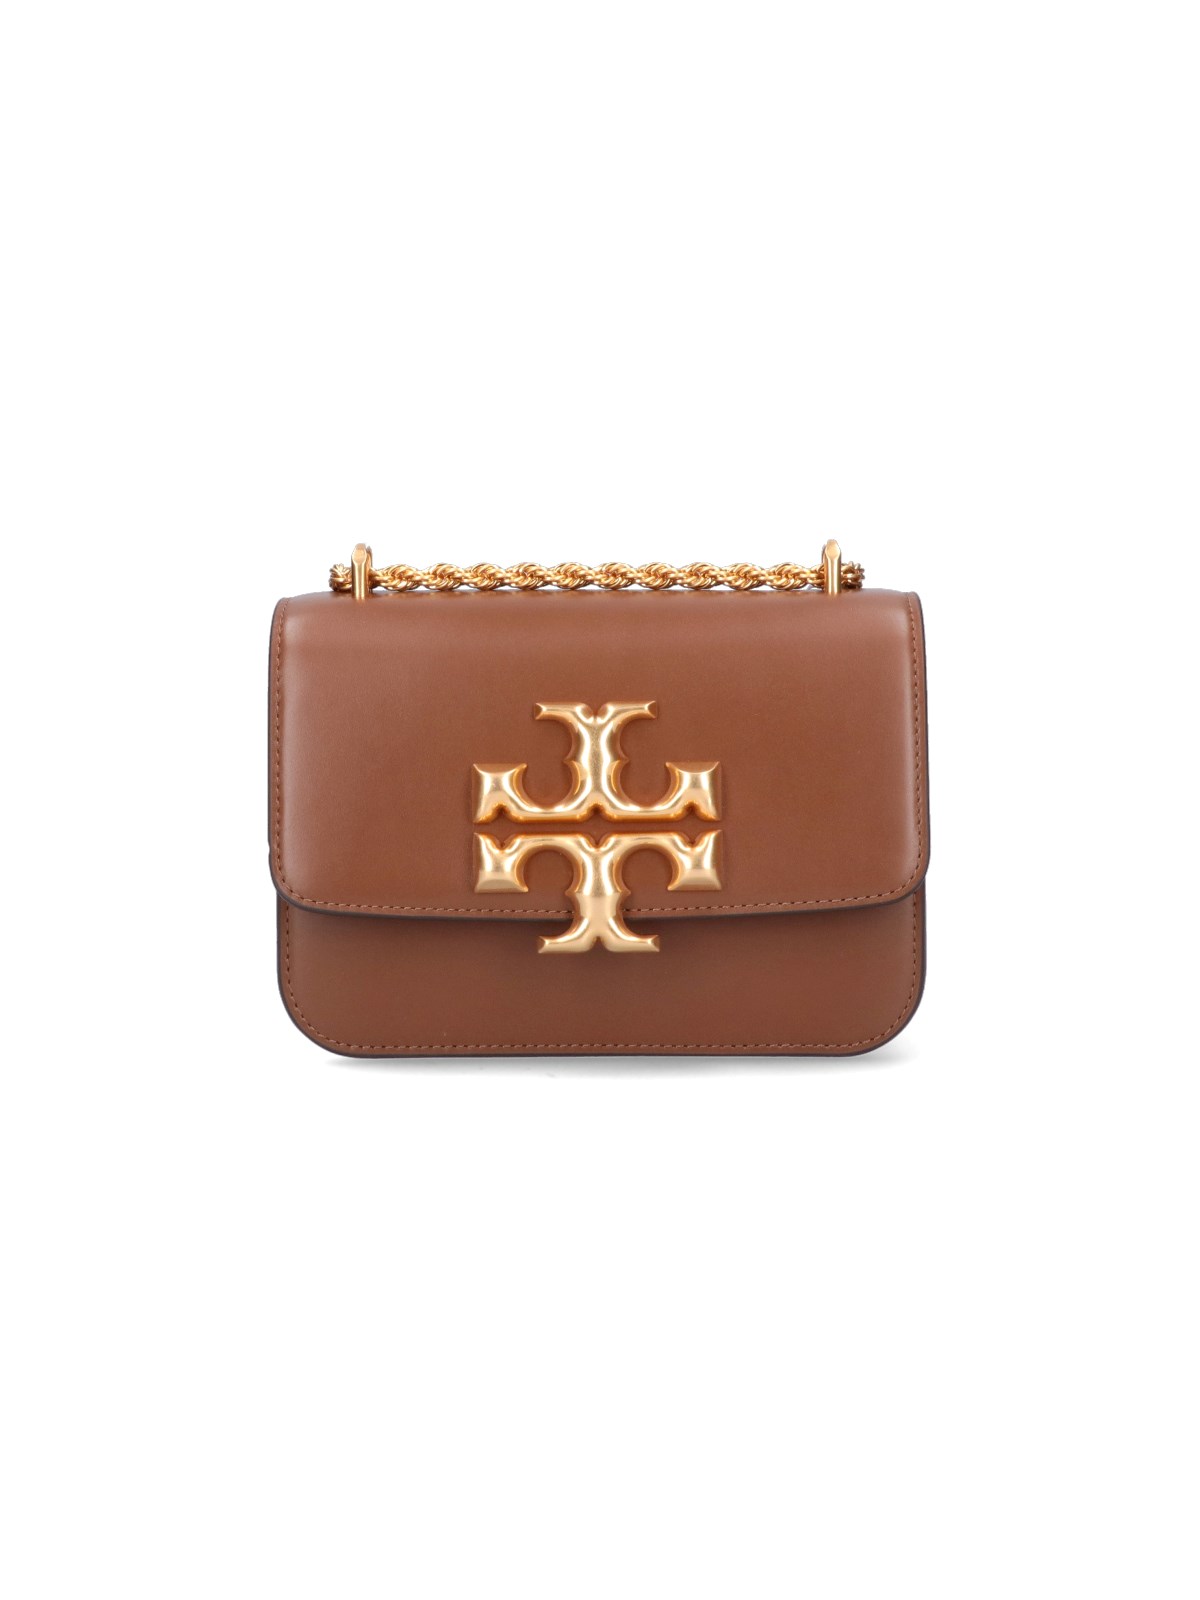 Tory Burch Small Bag 'eleanor' In Brown